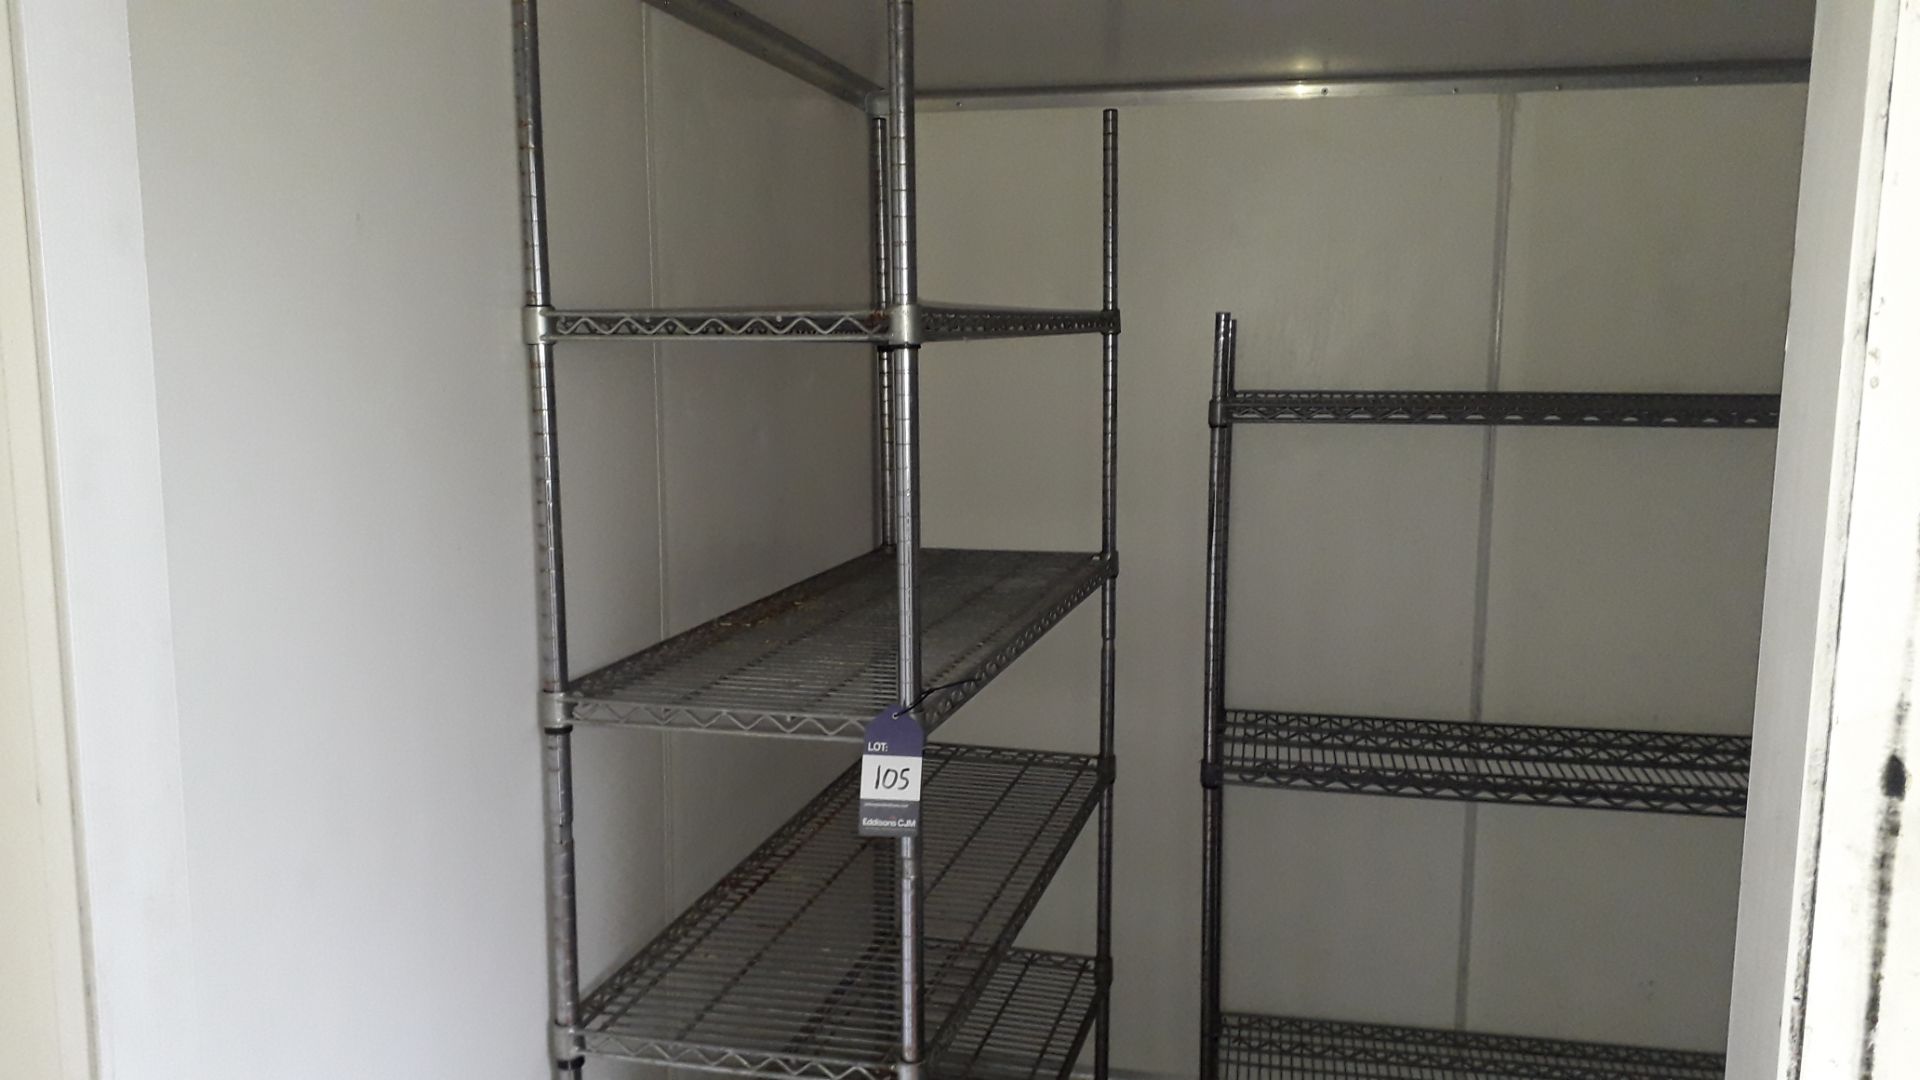 3 x Bays Adjustable Wire Shelving to Cold Room (2 x 1500mm and 1 x 1200mm). Located at Fresco's - Image 2 of 3